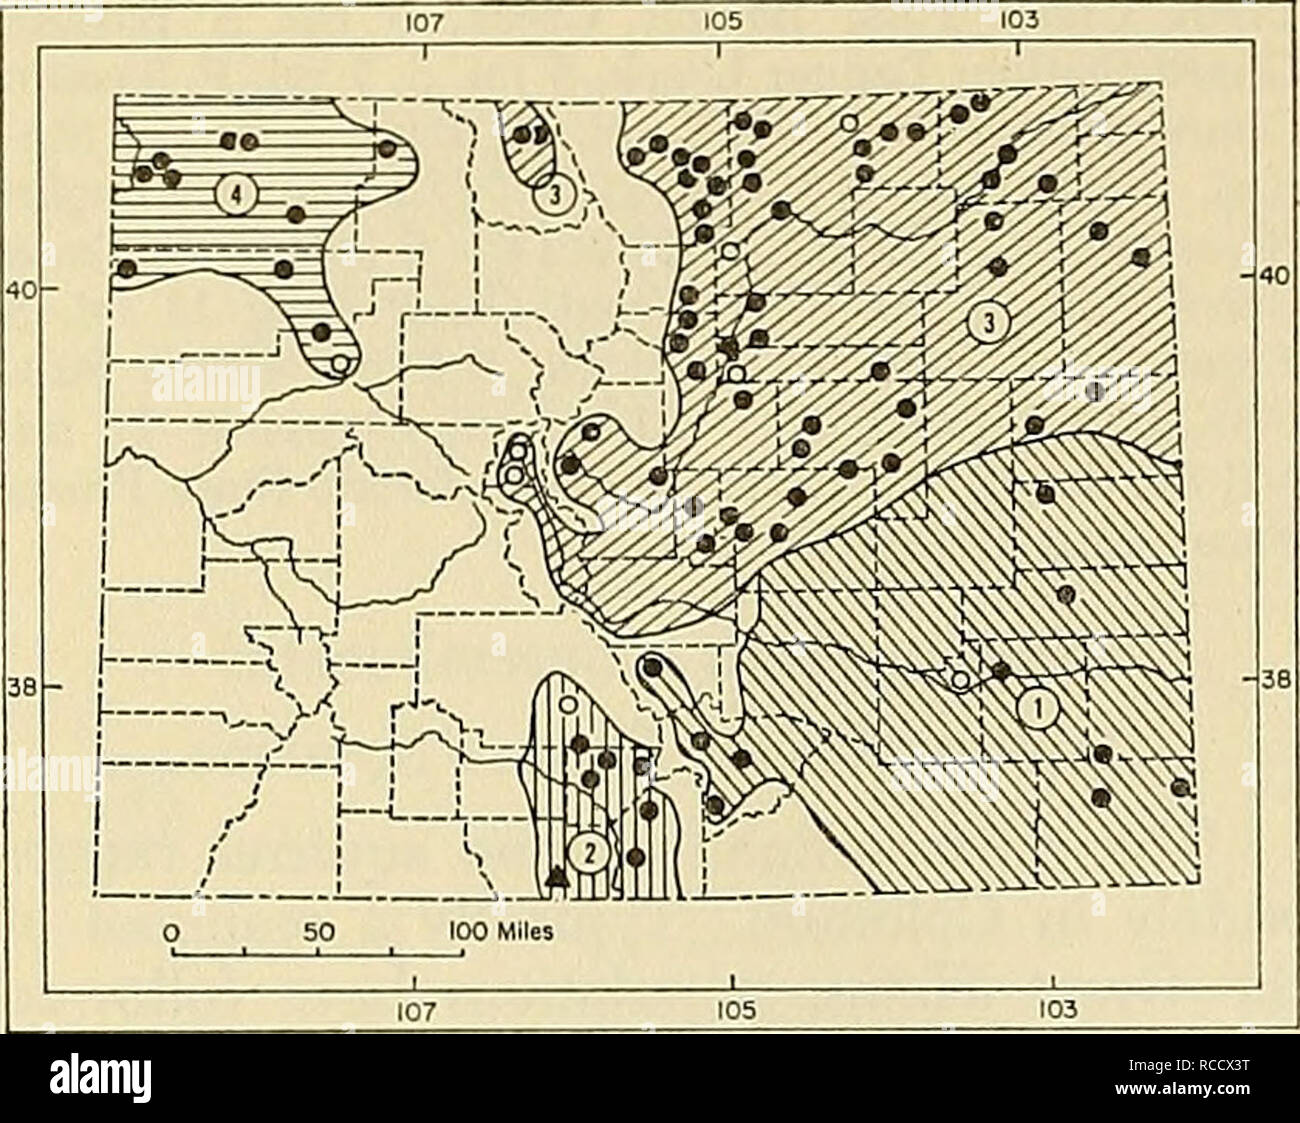 . Distribution of mammals in Colorado. Mammals. 124 MONOGRAPH MUSEUM OF NATURAL HISTORY NO. 3. Fig. 46. Distribution of Spermophilus tridecem- lineatus in Colorado. 1. S. t. arenicola. 2. S. t. blanca. 3. S. t. pallidus. 4. S. t. parvus. For explana- tion of symbols, see p. 9. Comparisons.—From S. t. pallidus, geo- graphically adjacent to the north, S. *. arenic- ola differs in generally smaller external size, slightly smaller average cranial size, and paler (more reddish) color of dorsal stripes (after A. H. Howell, 1938:111). For comparison with S. t. blanca, see account of that sub- species Stock Photo